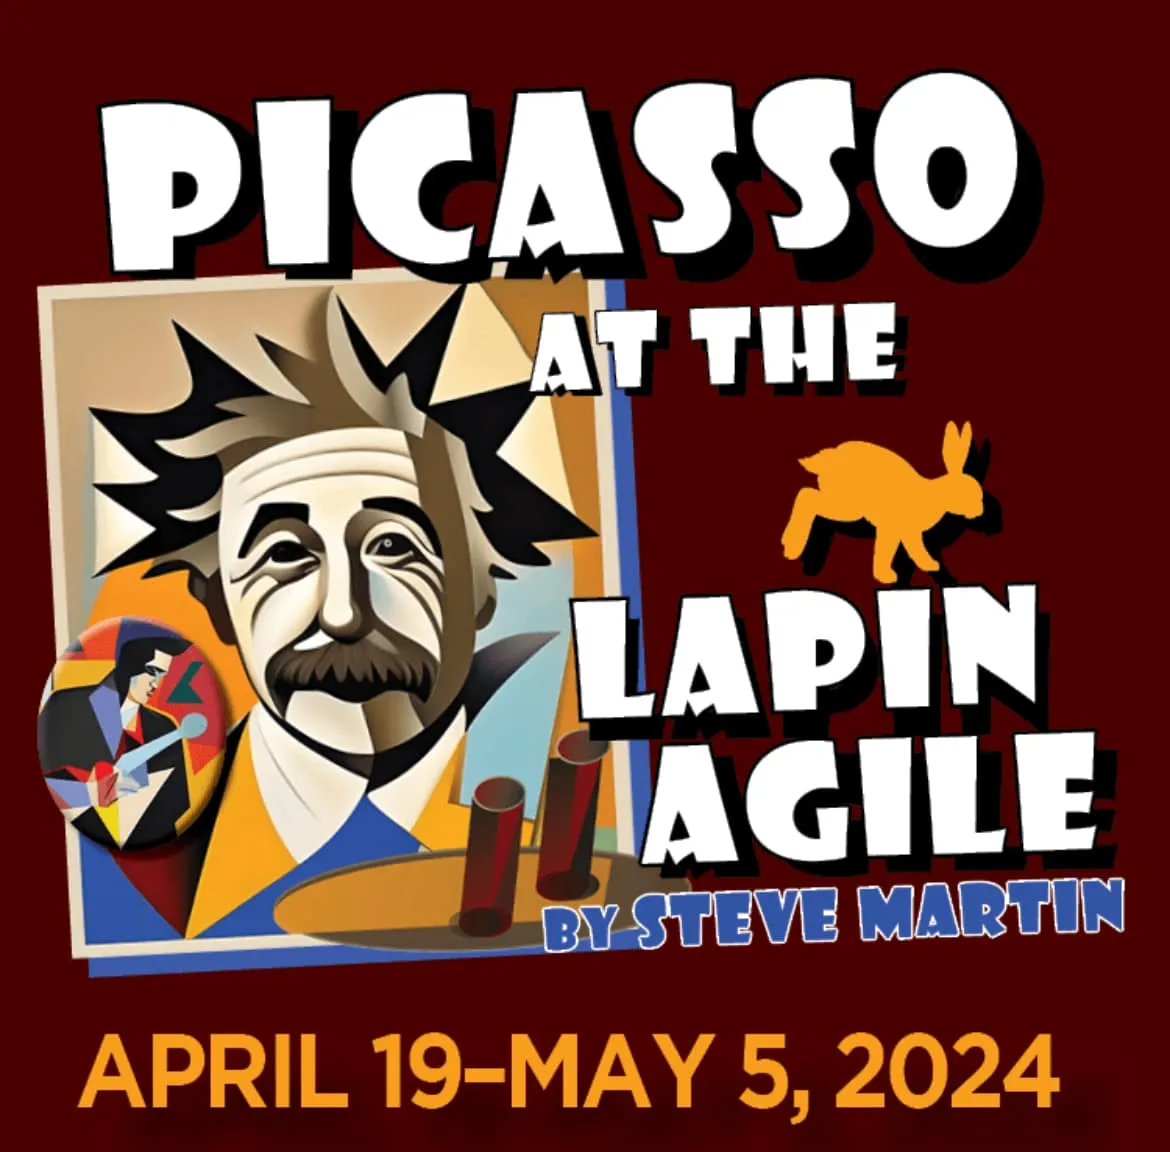 image from Picasso at the Lapin Agile